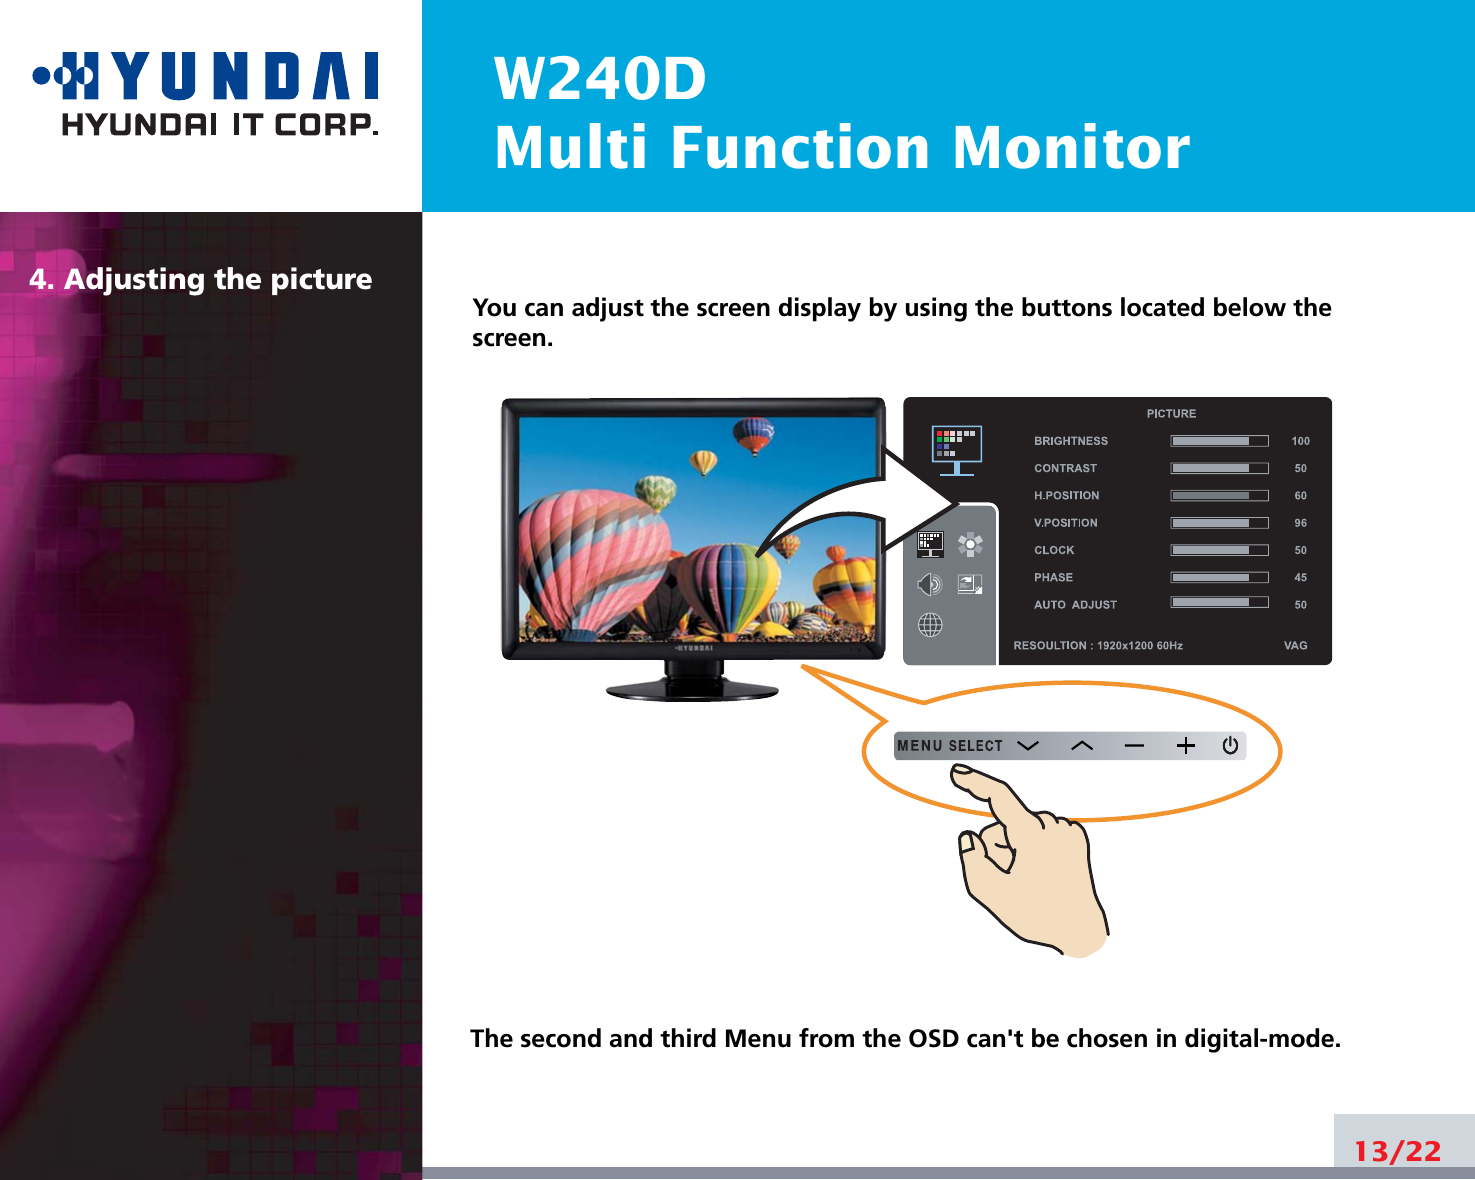 W240DMulti Function Monitor4. Adjusting the picture13/22You can adjust the screen display by using the buttons located below thescreen.The second and third Menu from the OSD can&apos;t be chosen in digital-mode.